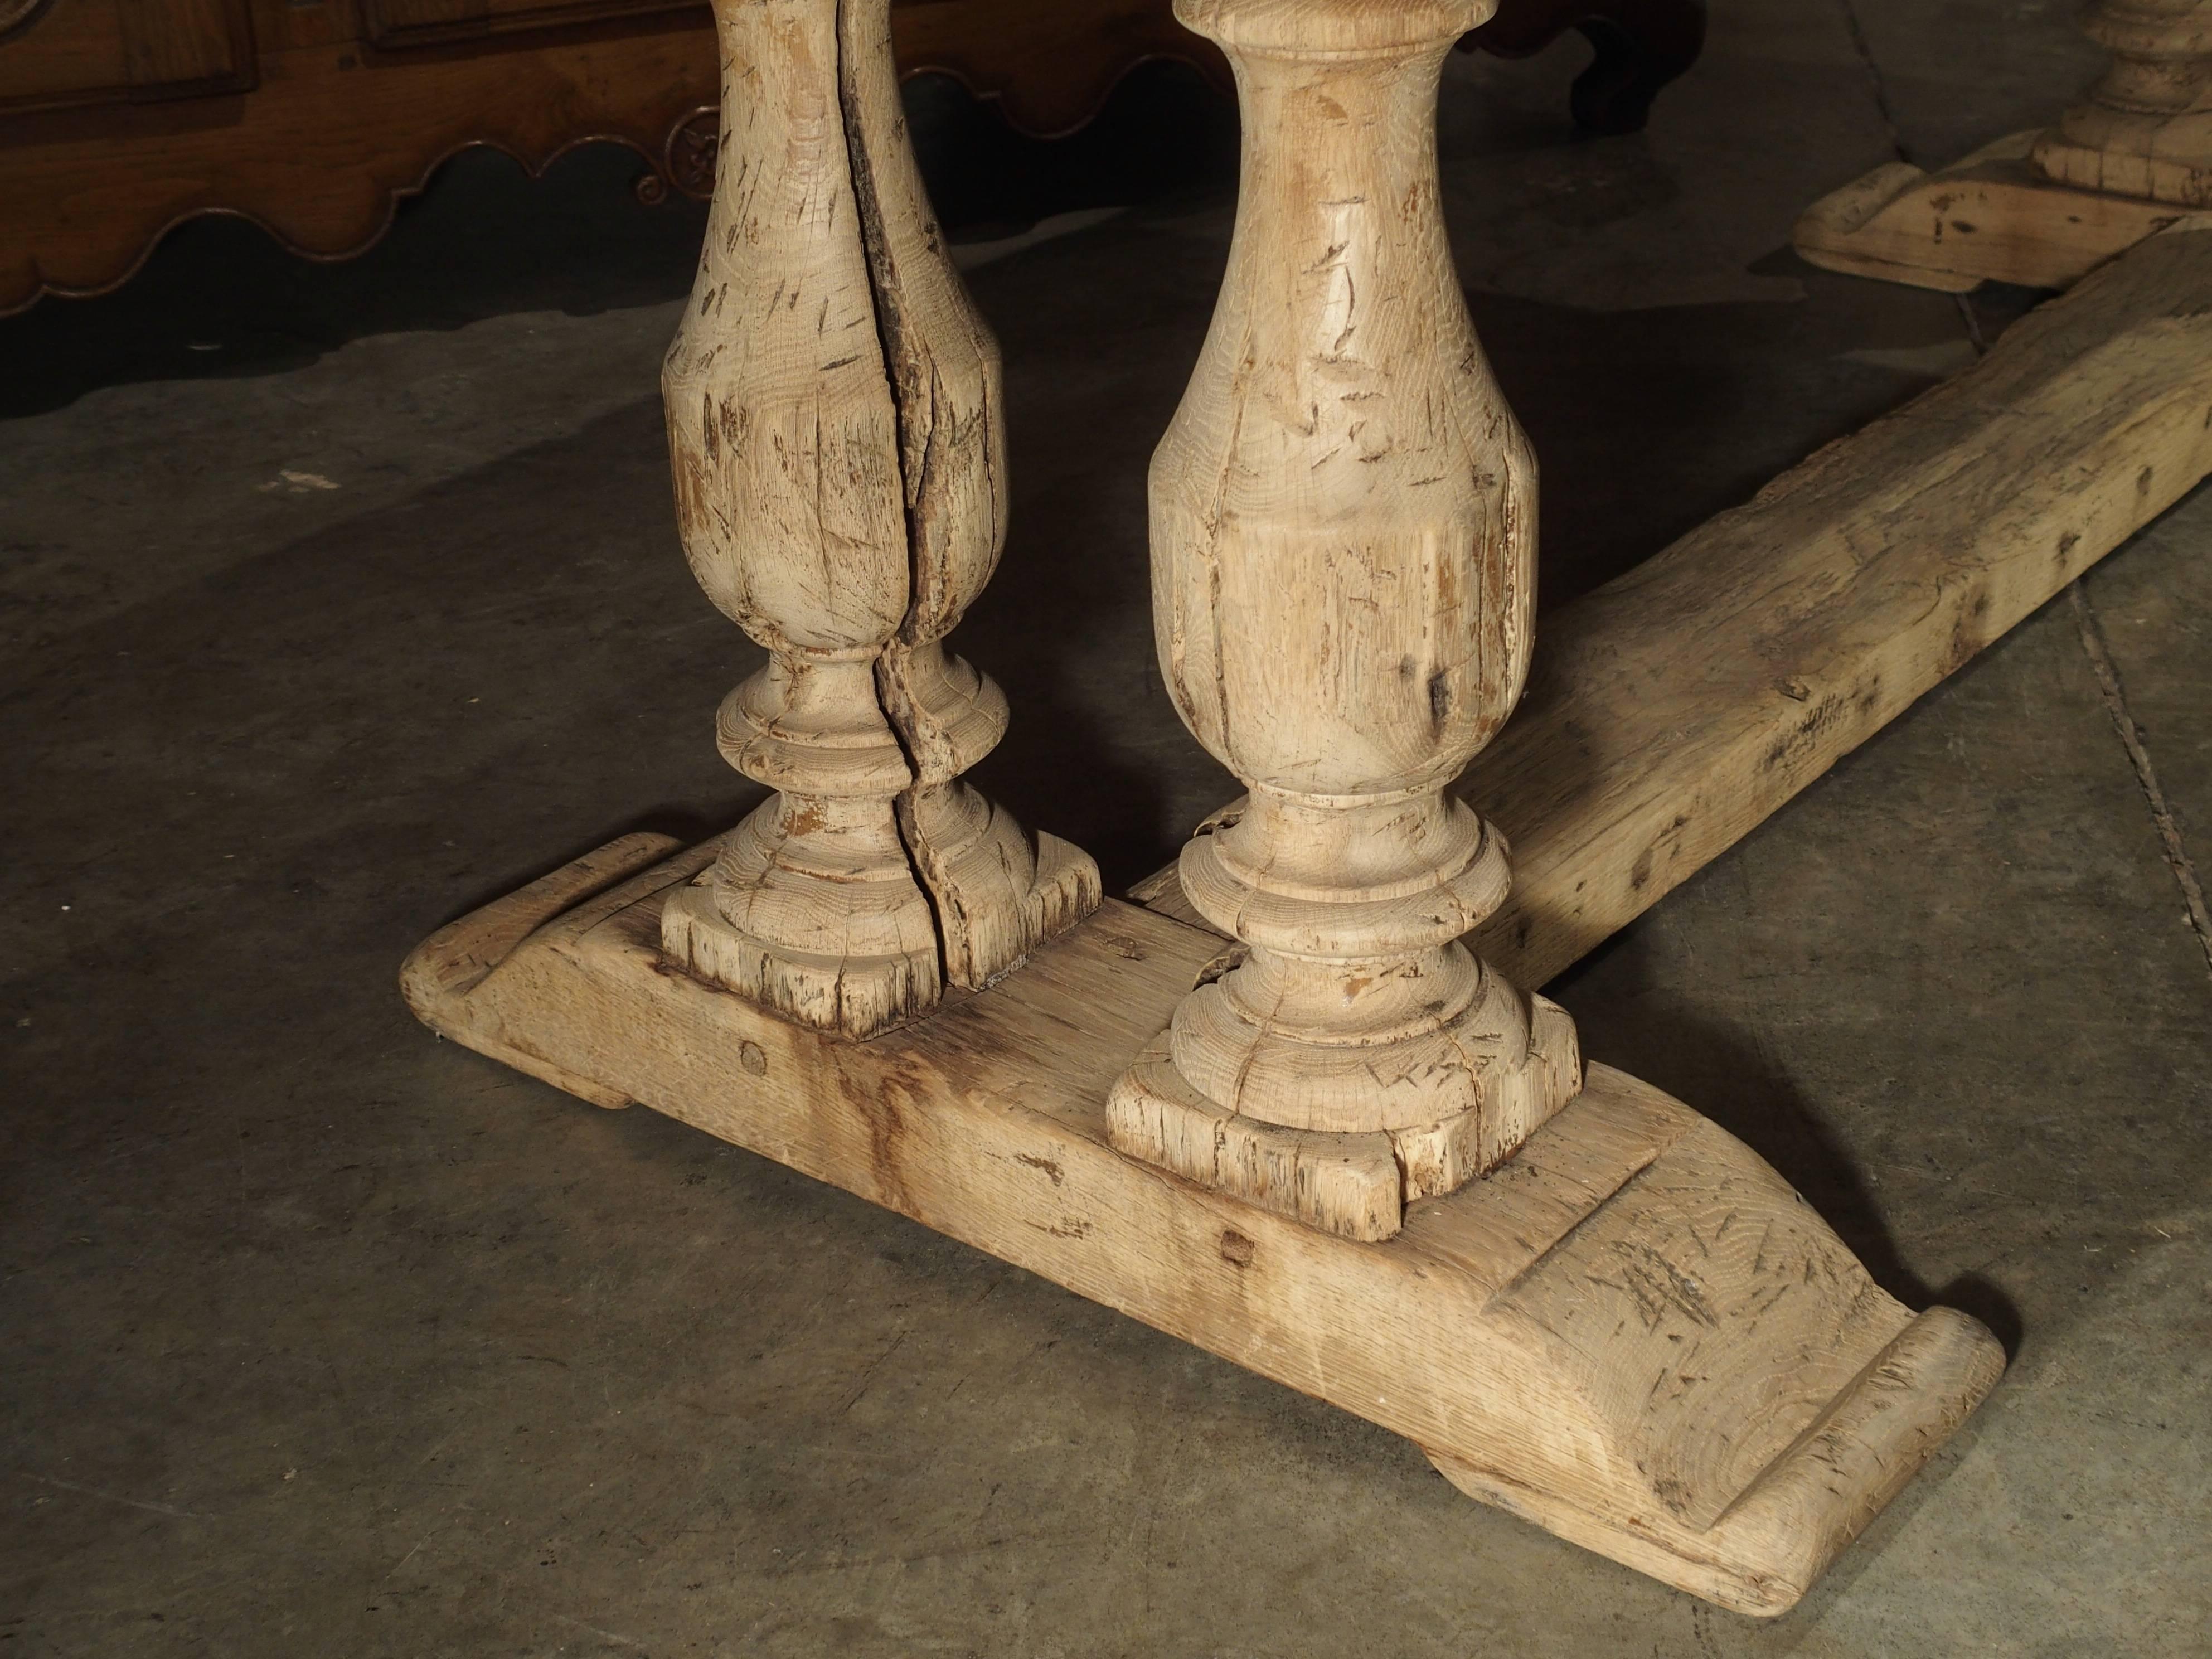 French Provincial Antique French Farm Table with Baluster Legs, Bleached Oak, circa 1880